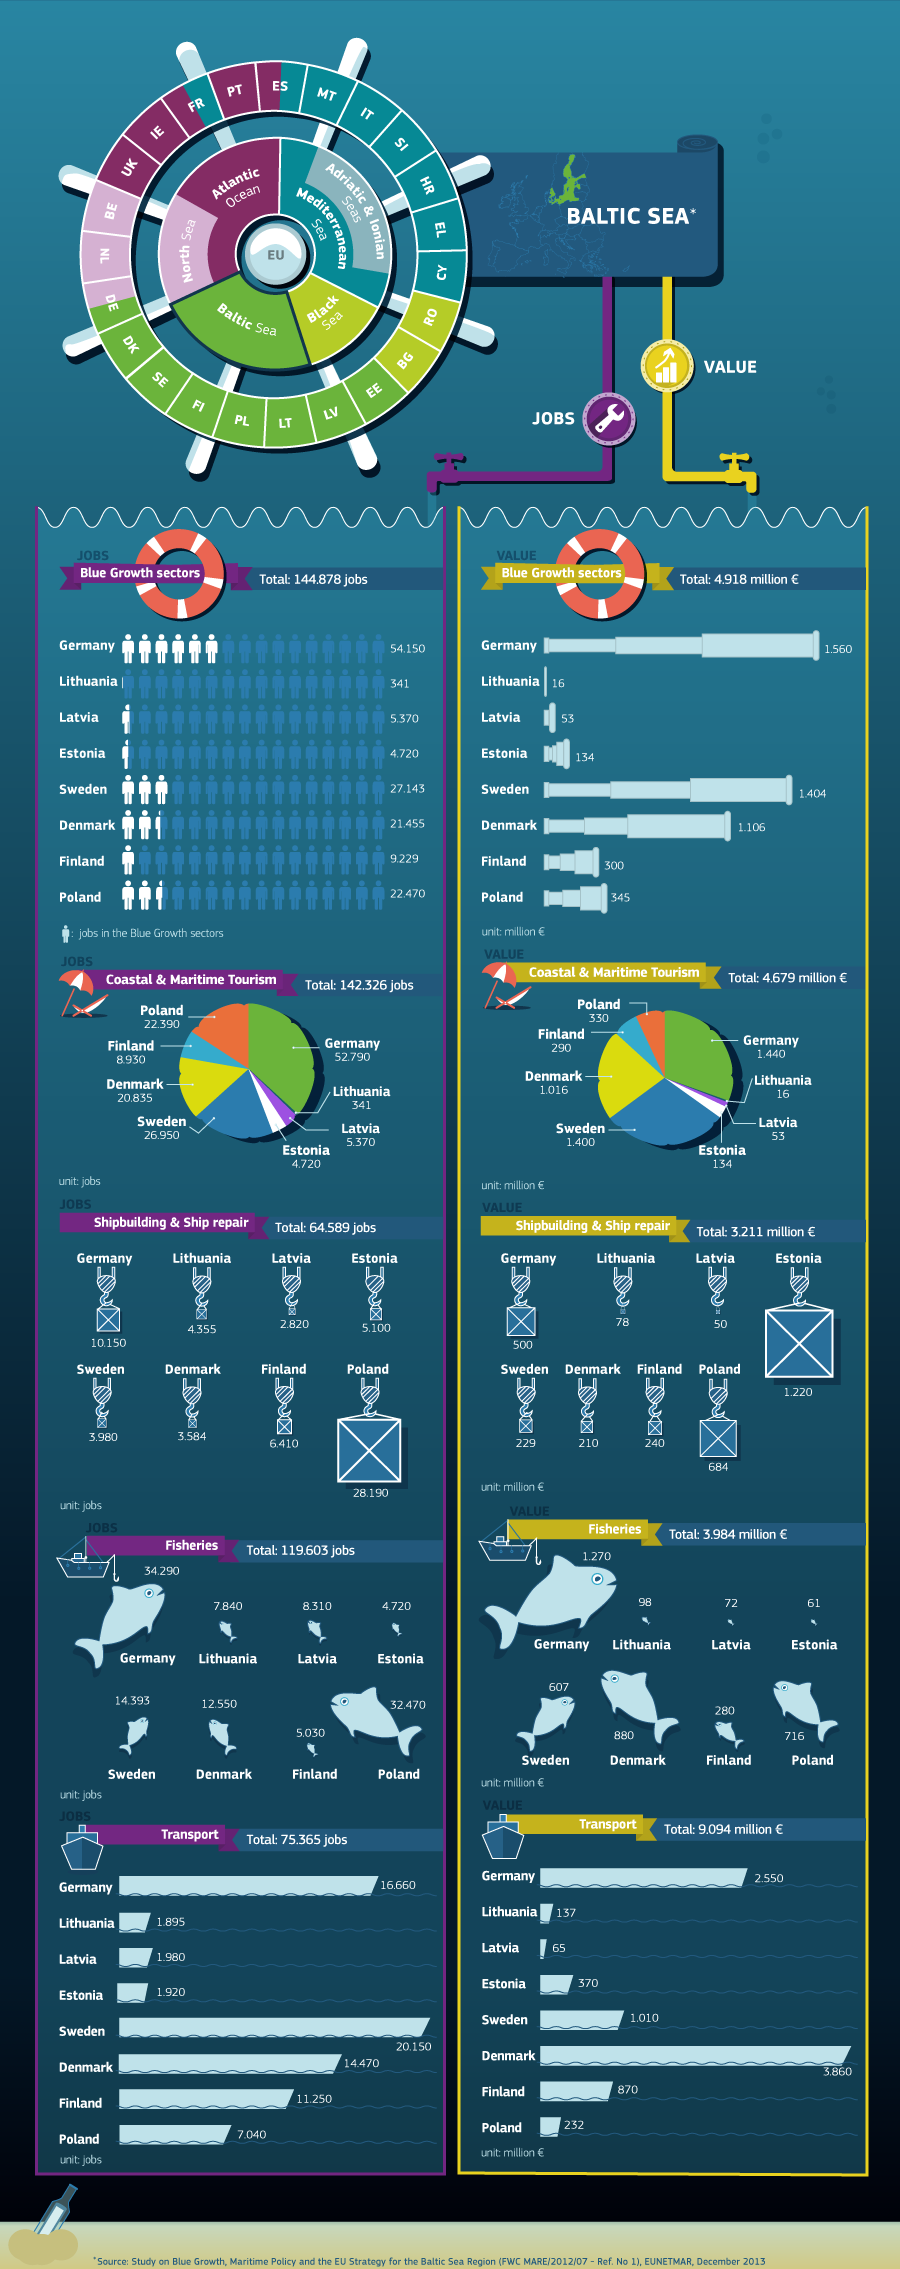 Baltic Sea infographic jobs and value from the European Commissioners agenda 2030